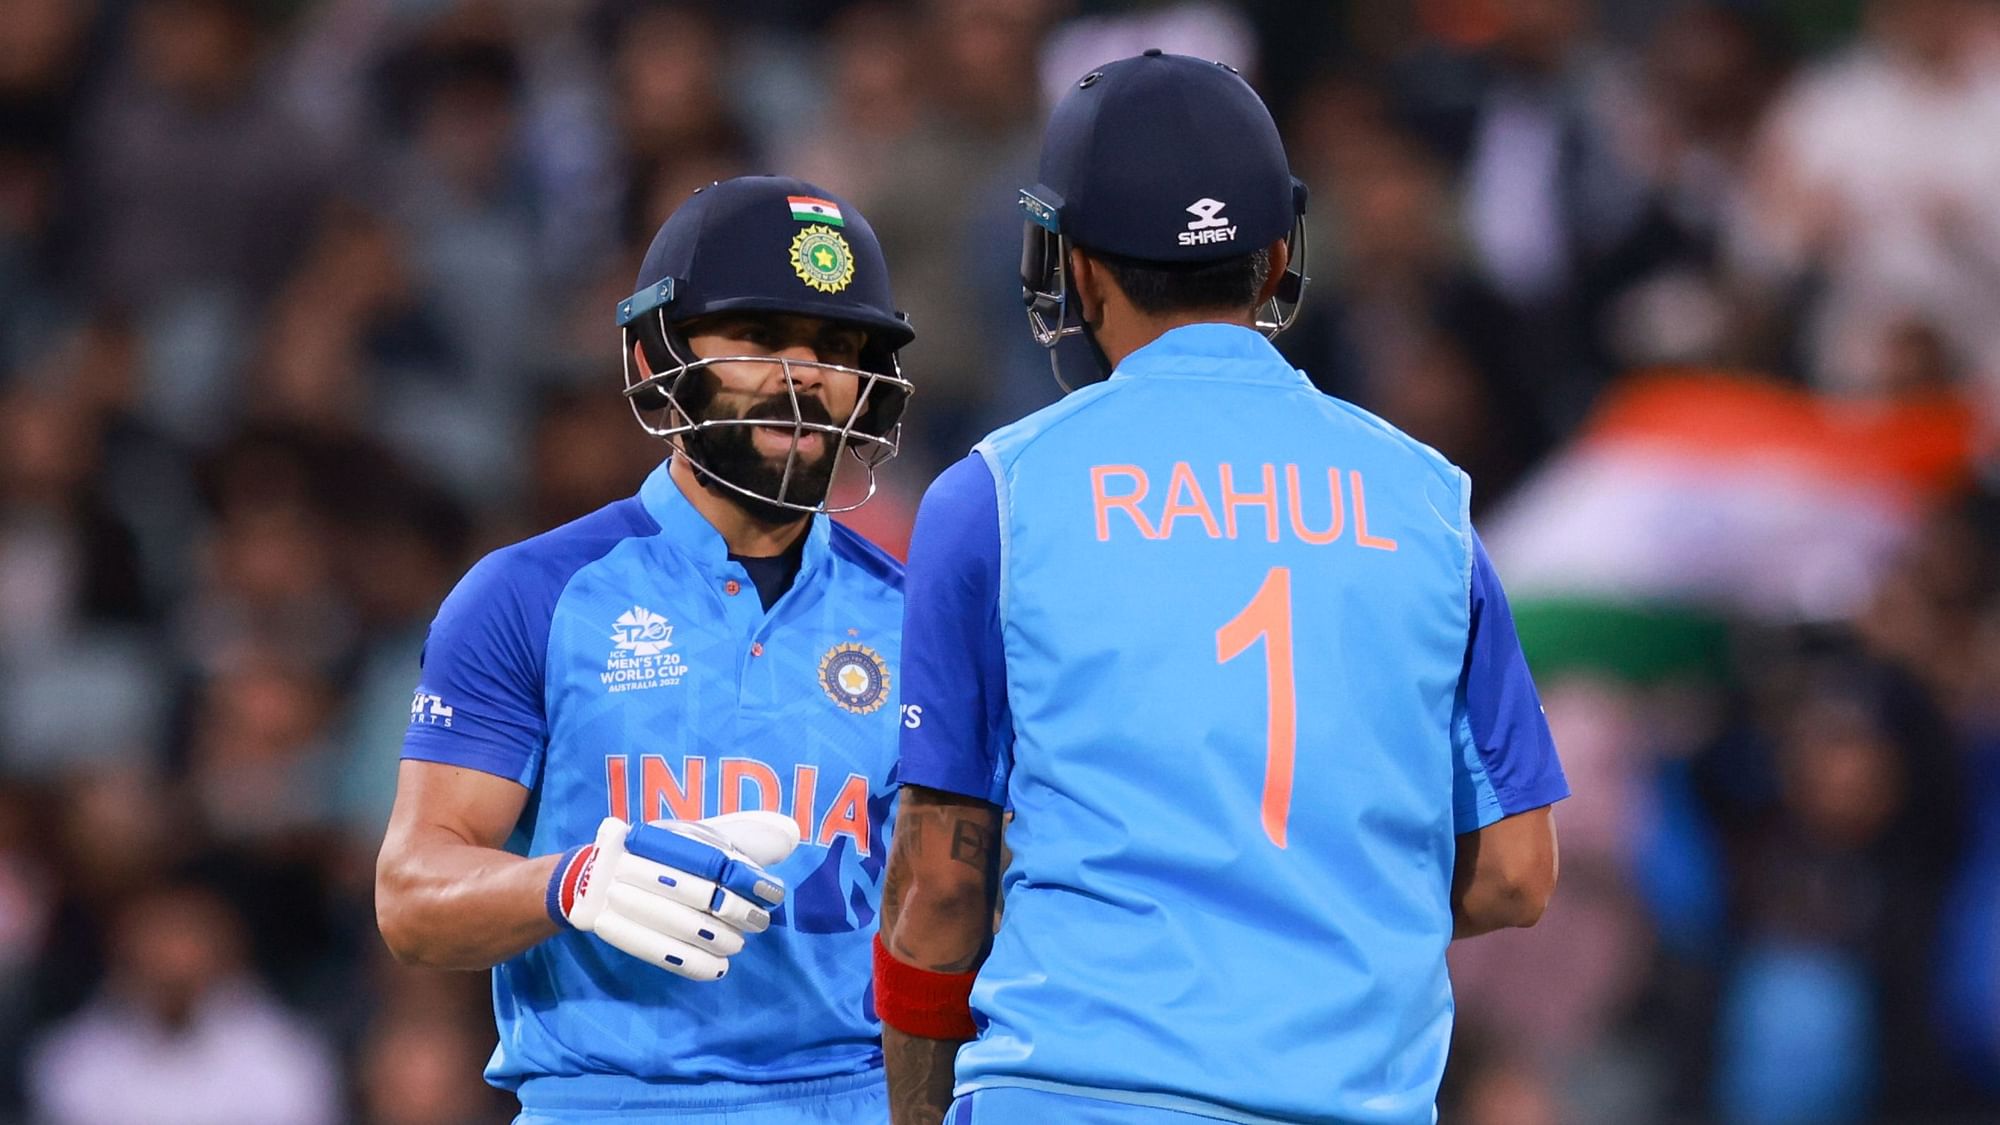 <div class="paragraphs"><p>Virat Kohli and KL Rahul were outstanding with the bat for India in the Super 12 encounter against Bangladesh at the T20 World Cup in Adelaide on Wednesday.&nbsp;</p></div>